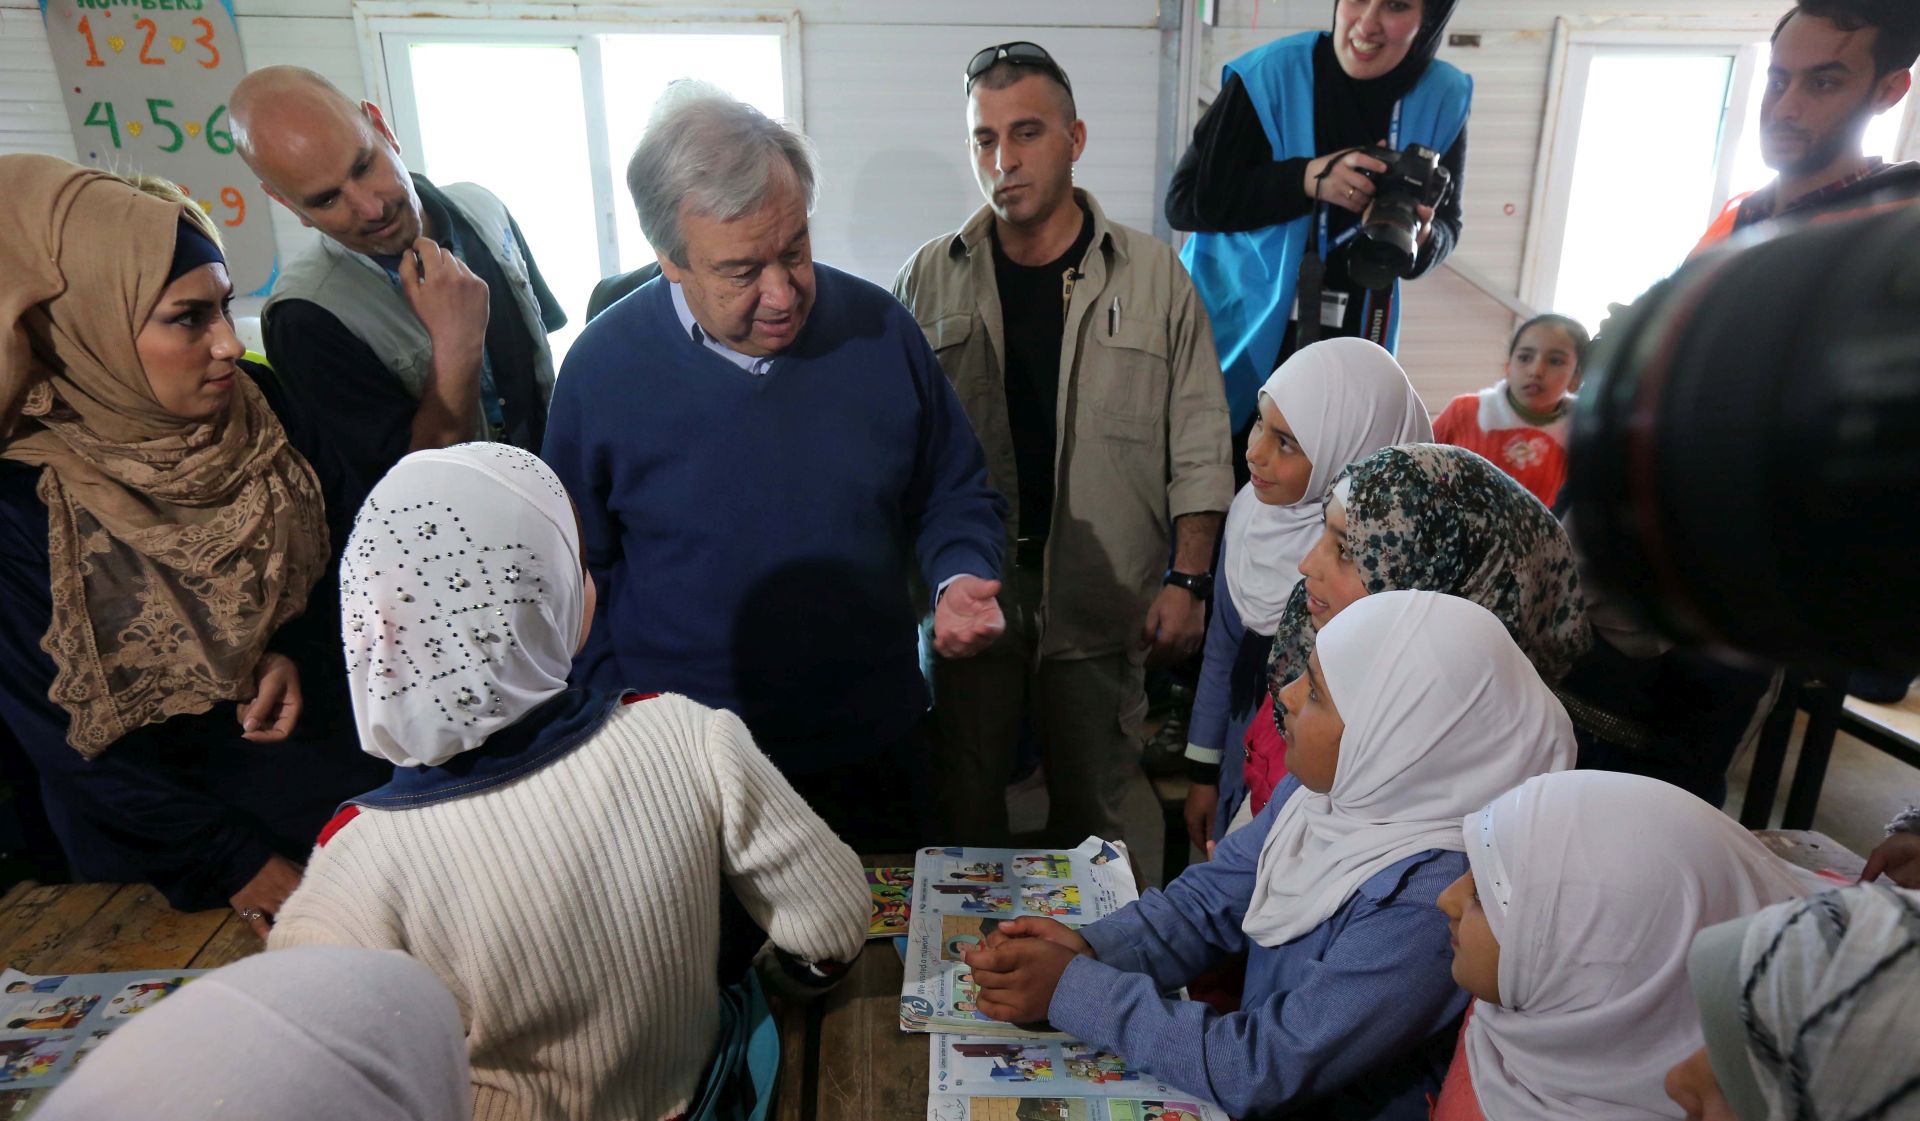 epa05875596 A handout photo made available by the United Nations shows UN Secretary-General Antonio Guterres speaking with school children during a visit to Zaatari refugee camp in Jordan, 28 March 2017. During a visit to Zaatari refugee camp in Jordan, Gutterres urged on 28 March all parties to the Syrian conflict to exert new peace efforts in the talks in Geneva.  EPA/UN PHOTO / SAHEM RABABAH HANDOUT  HANDOUT EDITORIAL USE ONLY/NO SALES